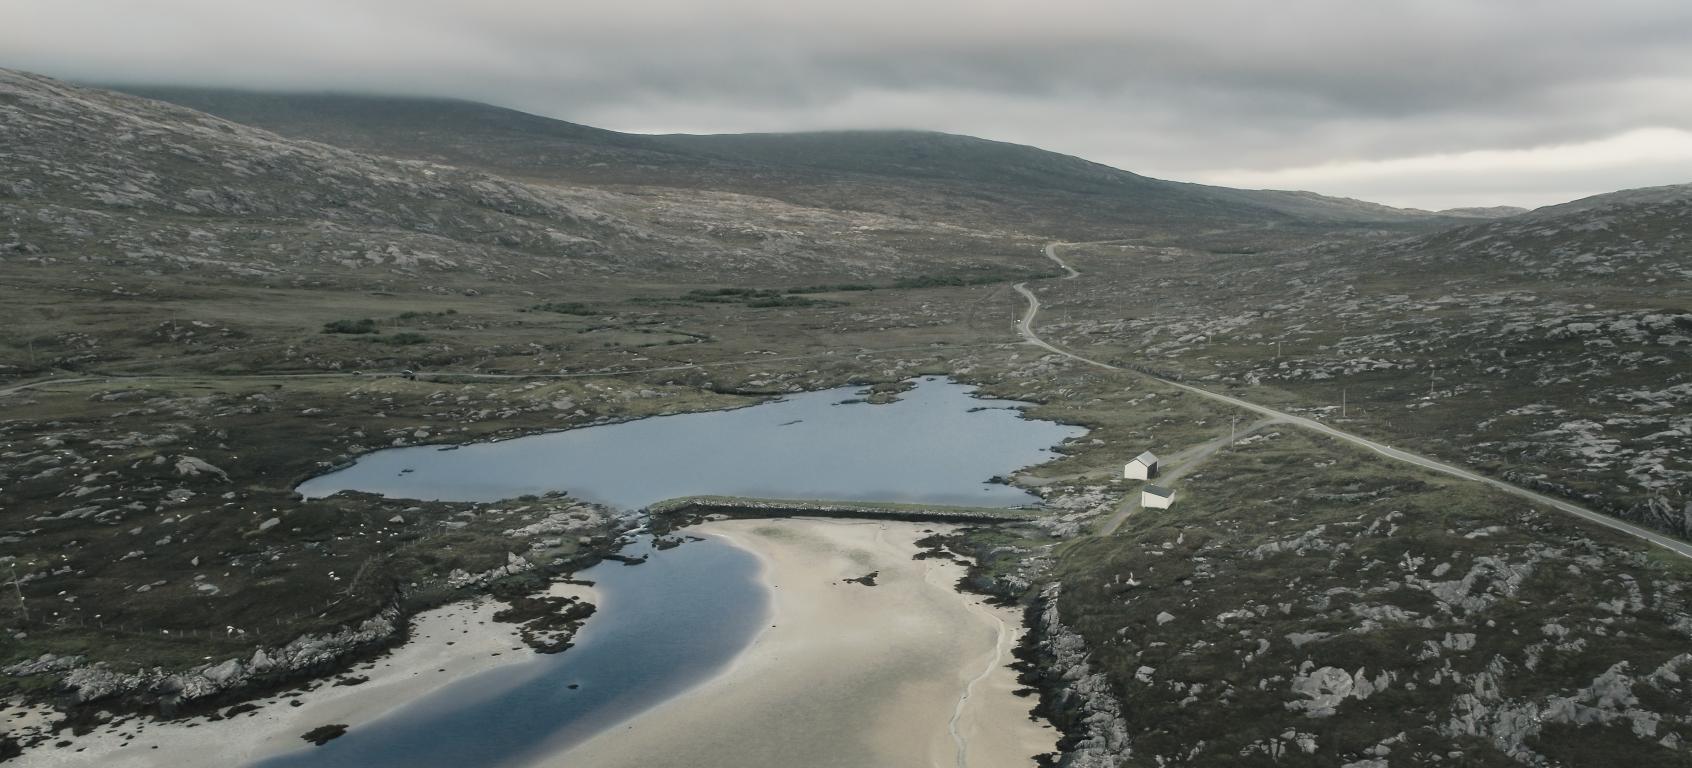 Shaped by glacial shifts, Harris' landscape is extraordinary. (Credit: Airborne Lens)